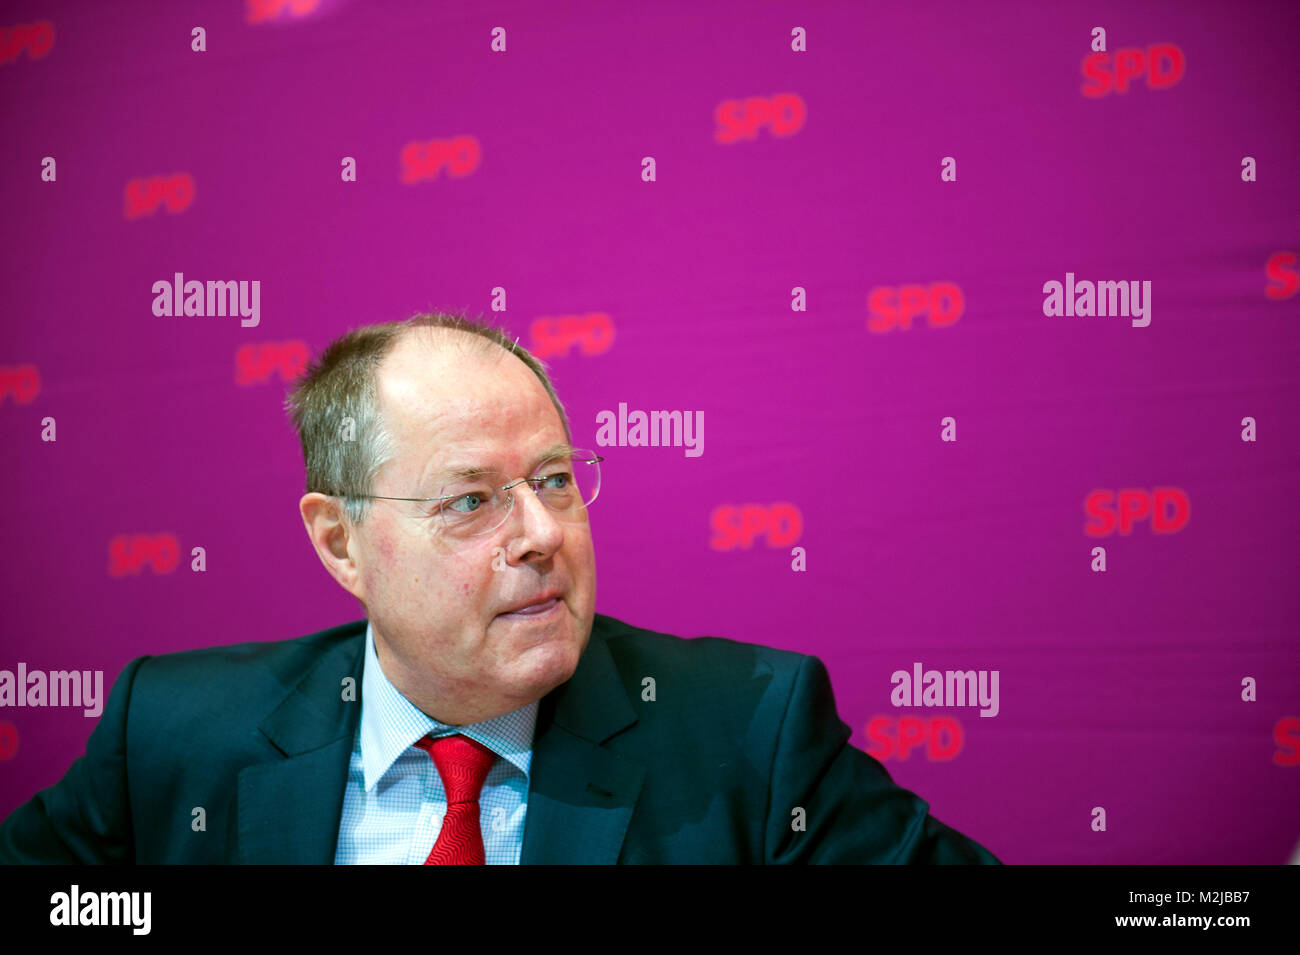 SPD party executive meeting. Social Democratic Party of Germany is a social-democratic political party in Germany. Peer Steinbrück. Stock Photo